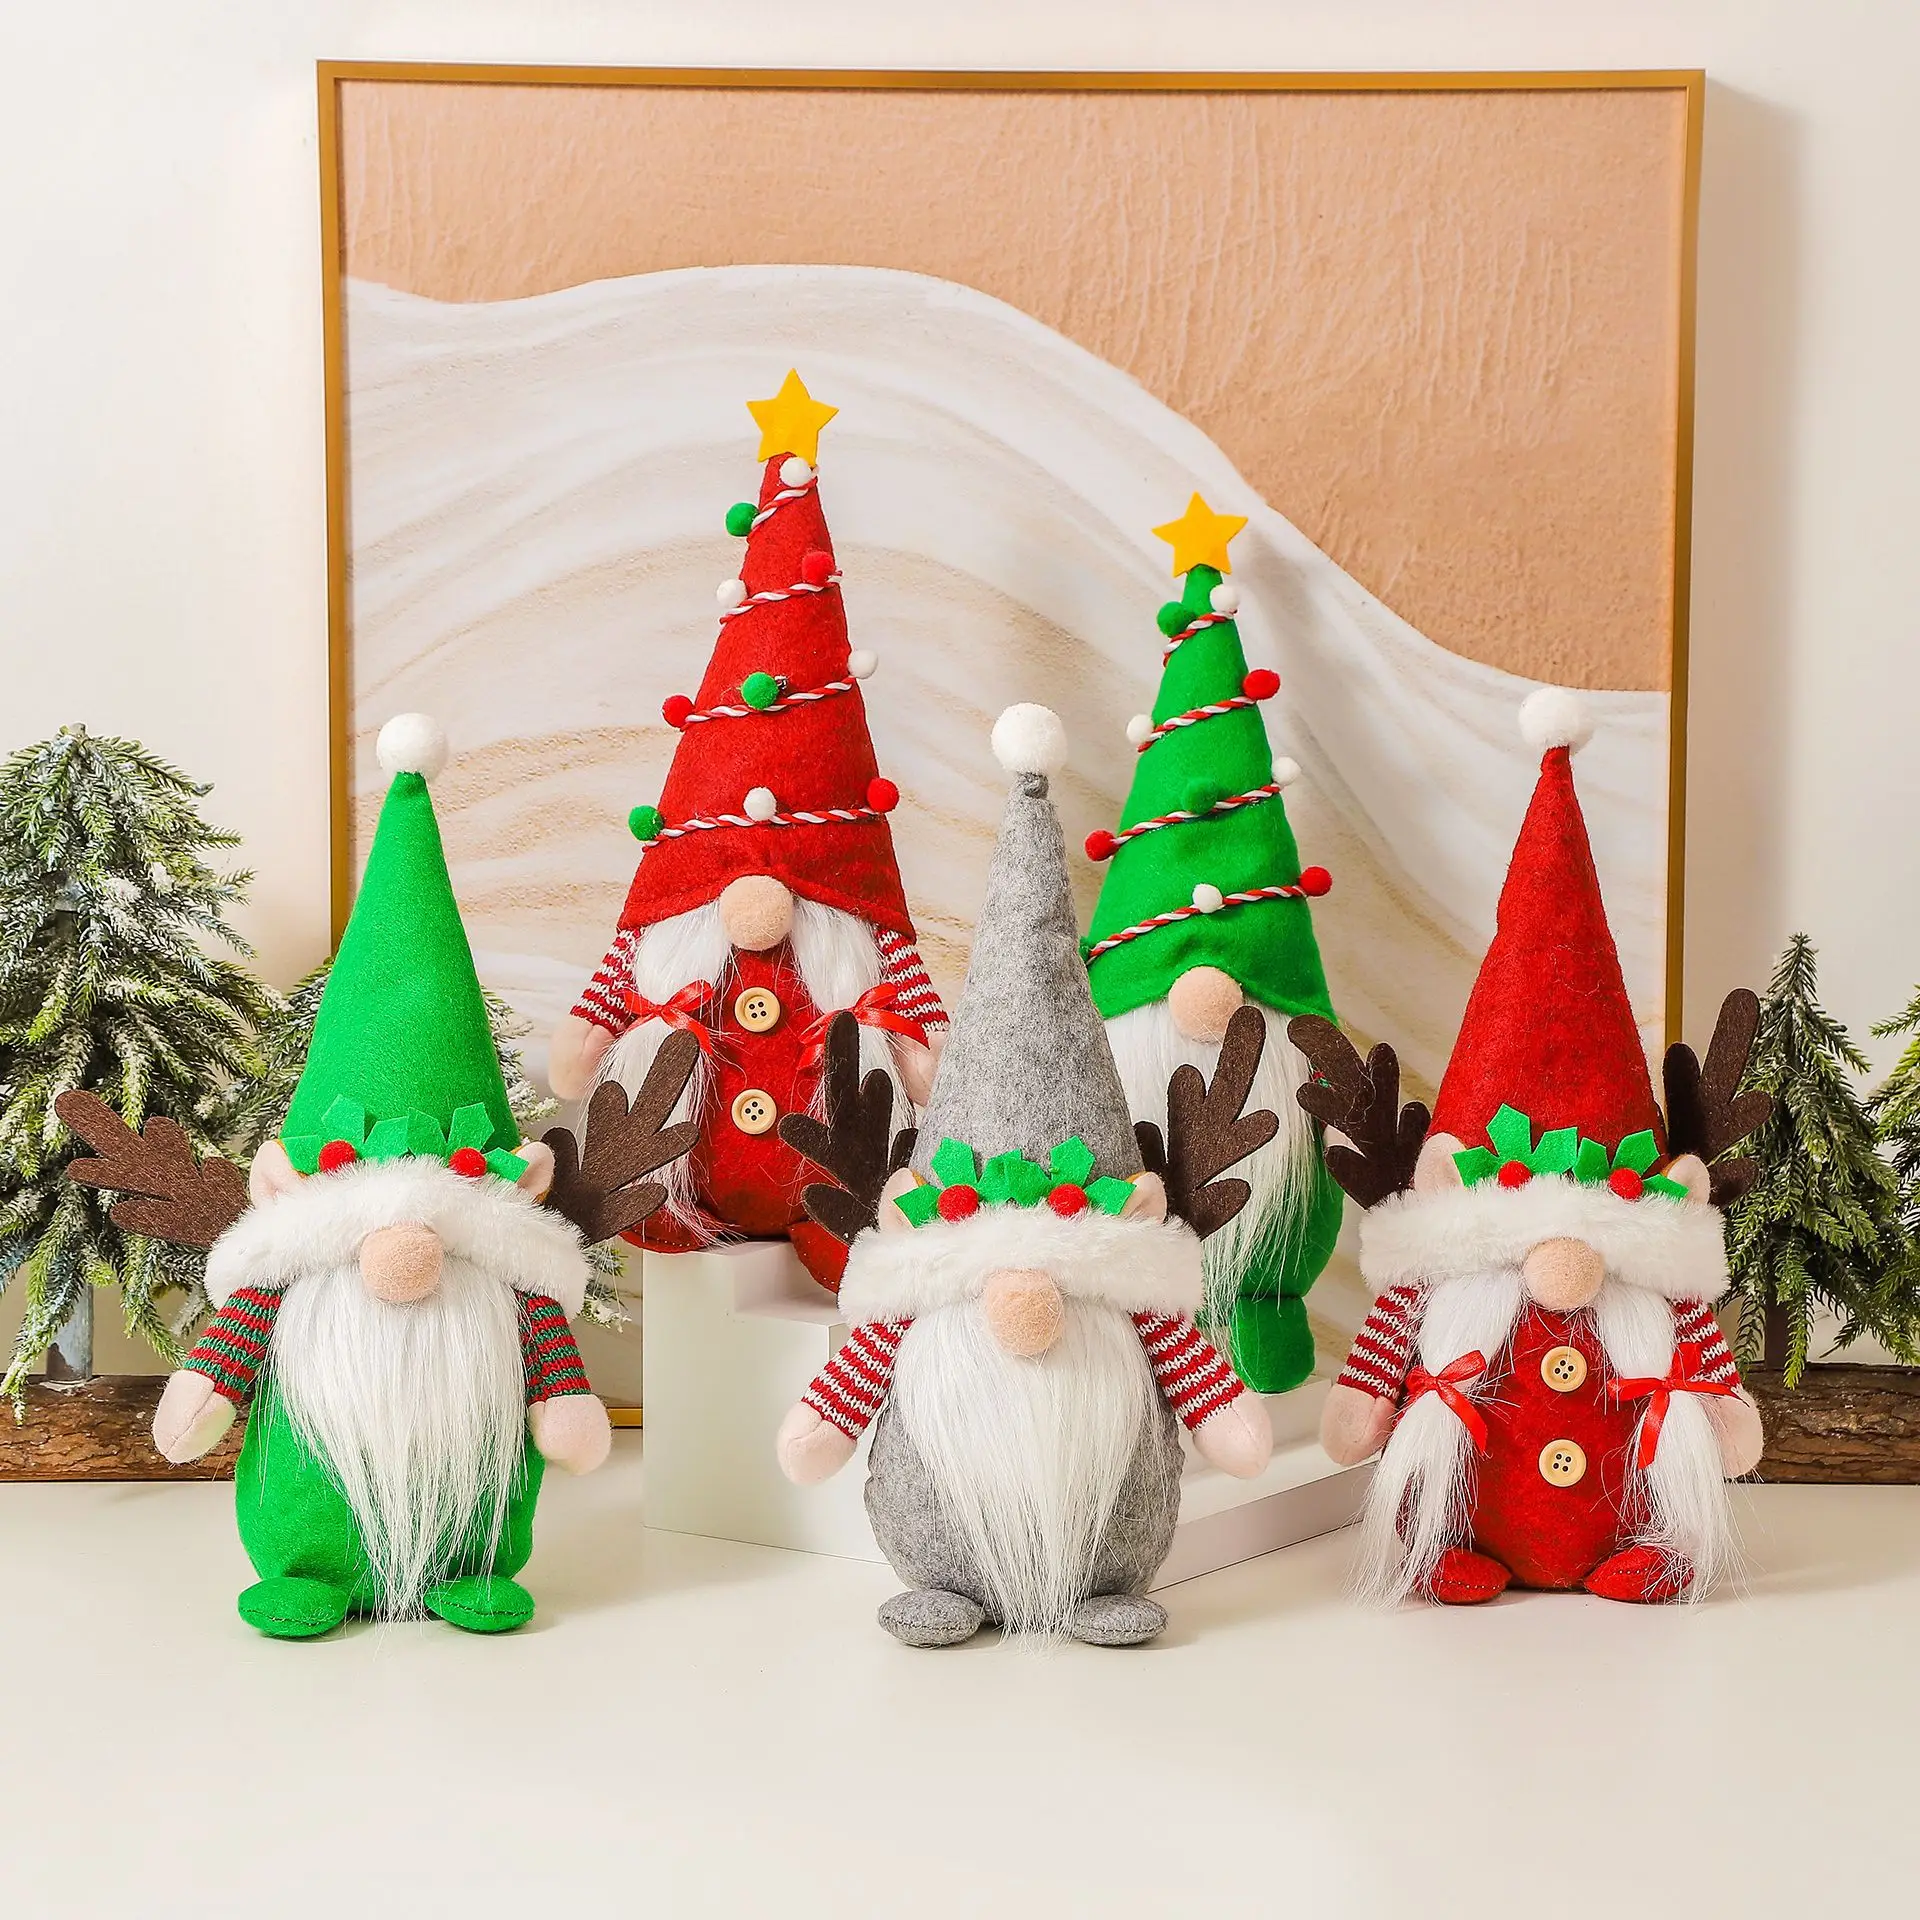 

Christmas Gnome, Santa Claus Faceless Decoration Standing Decorations Dwarfs Christmas Family Holiday Party Table Decor Gifts